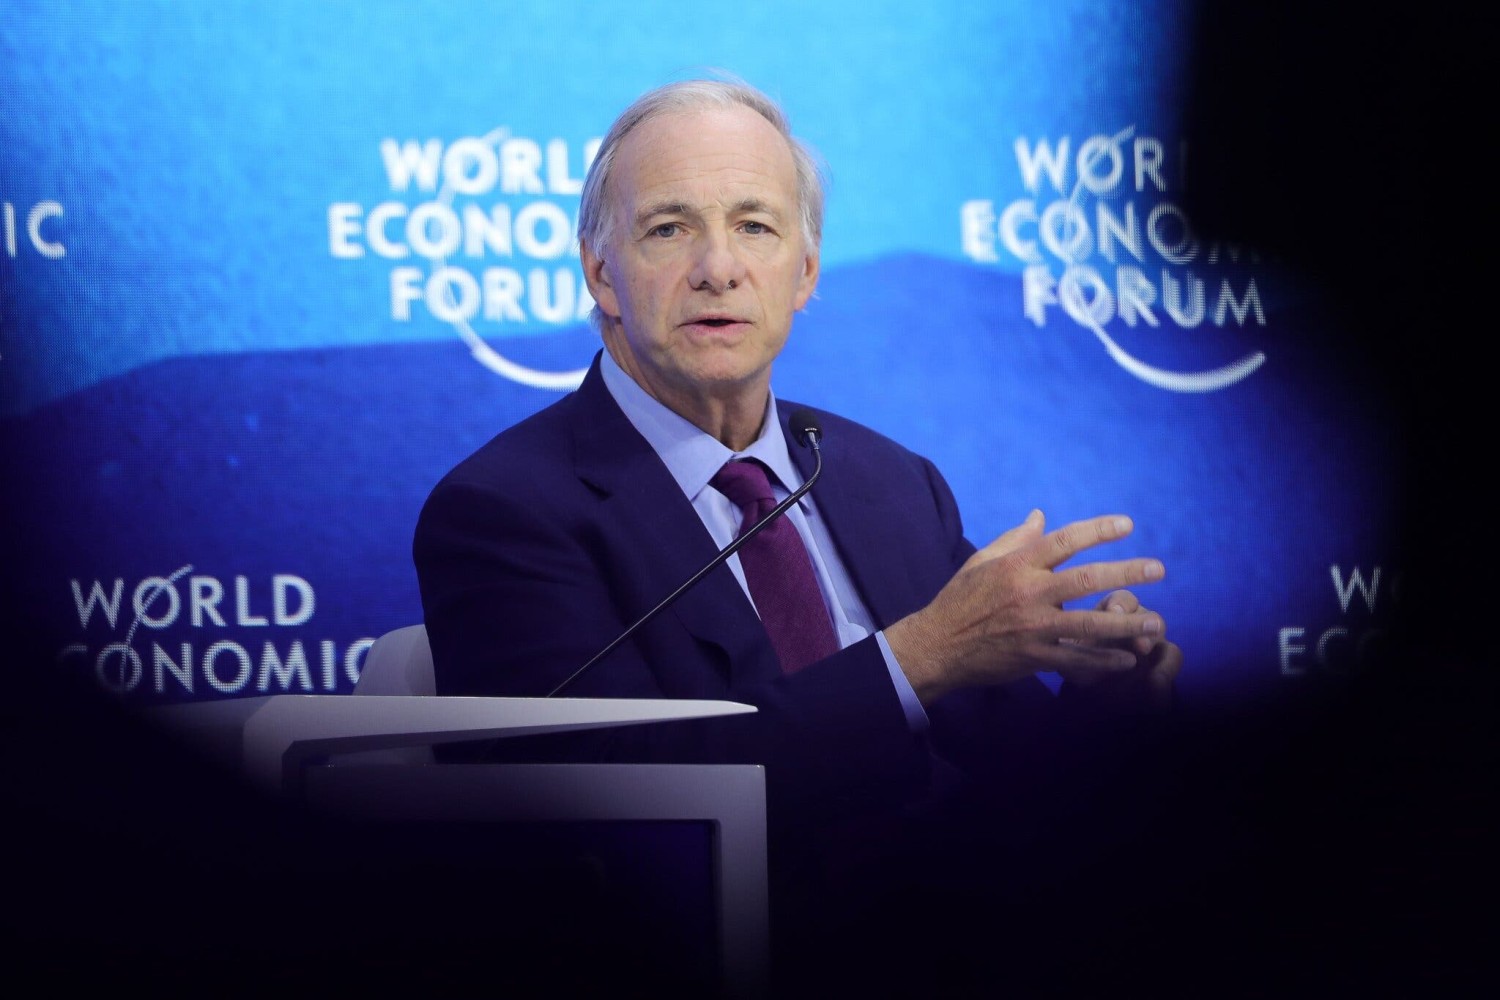 Since founding Bridgewater in his Manhattan apartment in 1975, Ray Dalio has been said to have developed prodigious skill at spotting, and making money from, big-picture global economic or political changes.Credit...Xinhua News Agency, via Getty Images